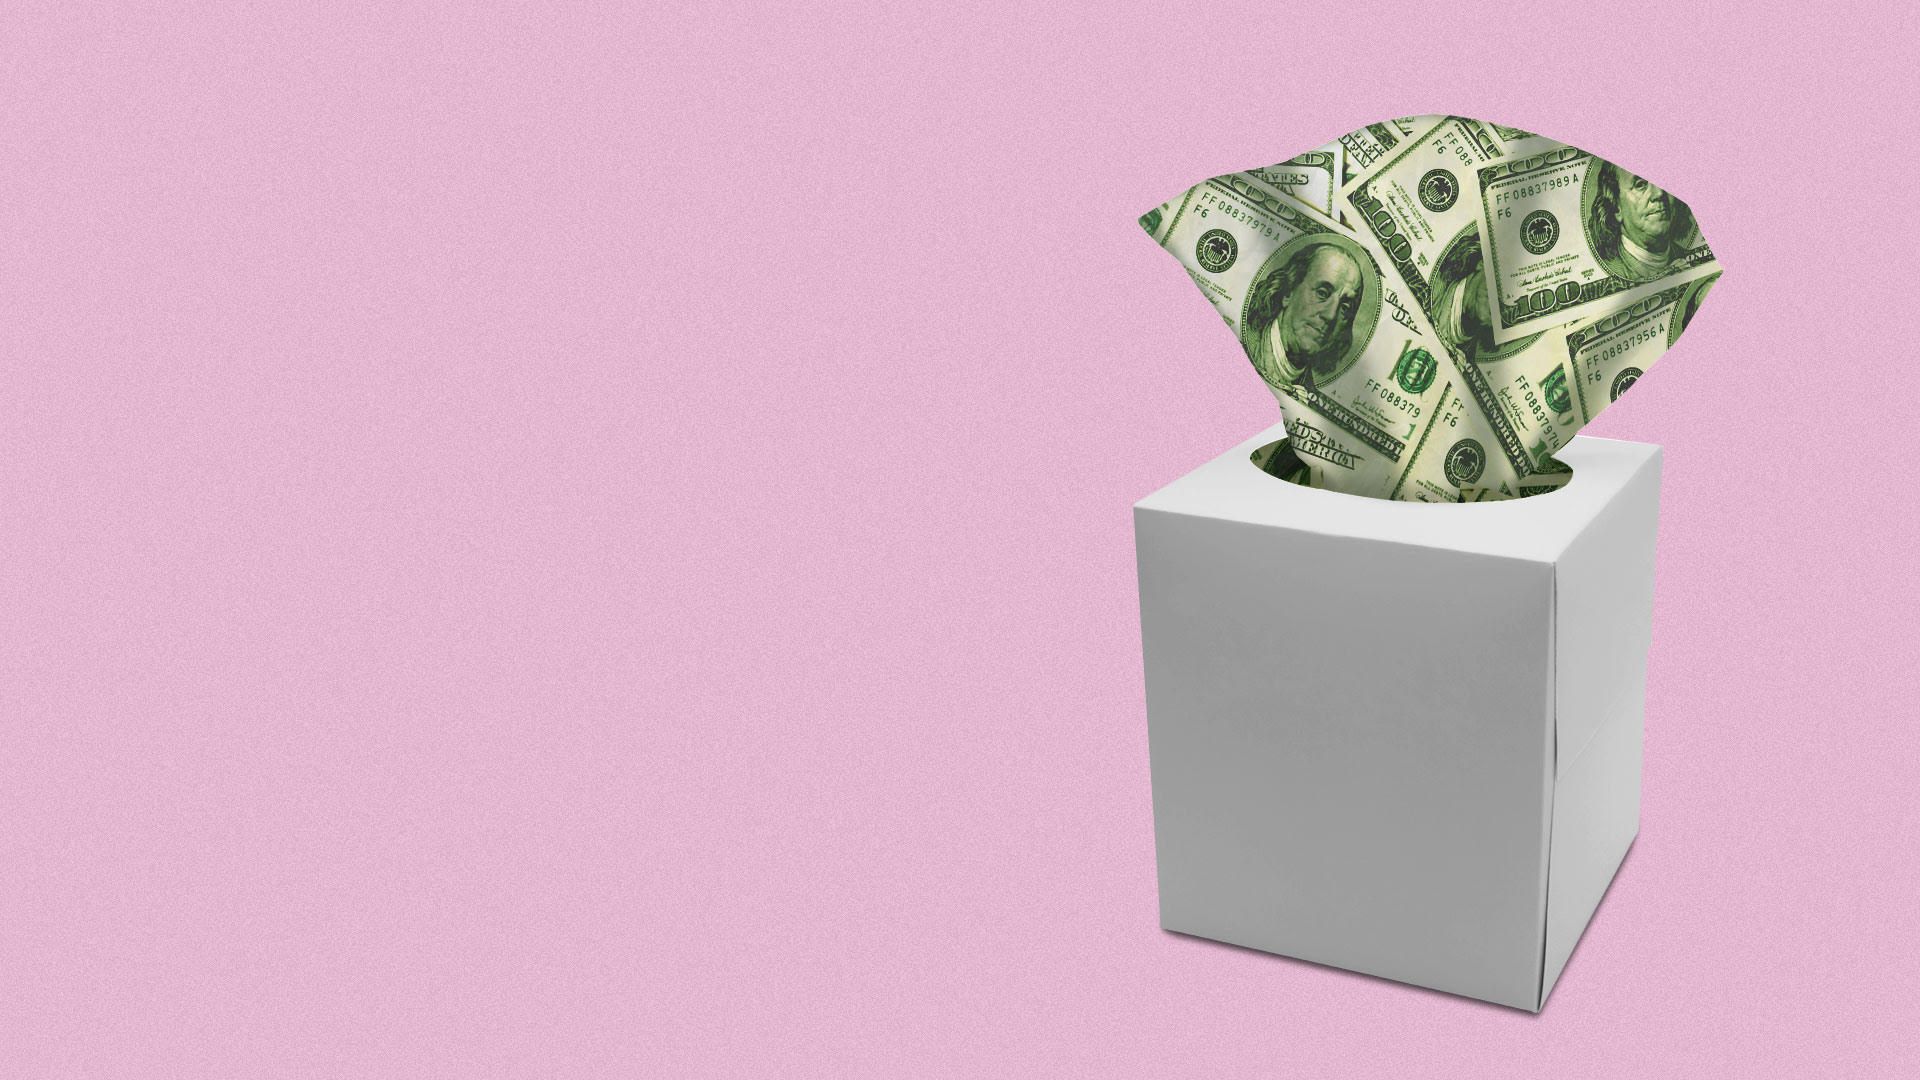 Illustration of tissue box with money patterned paper.